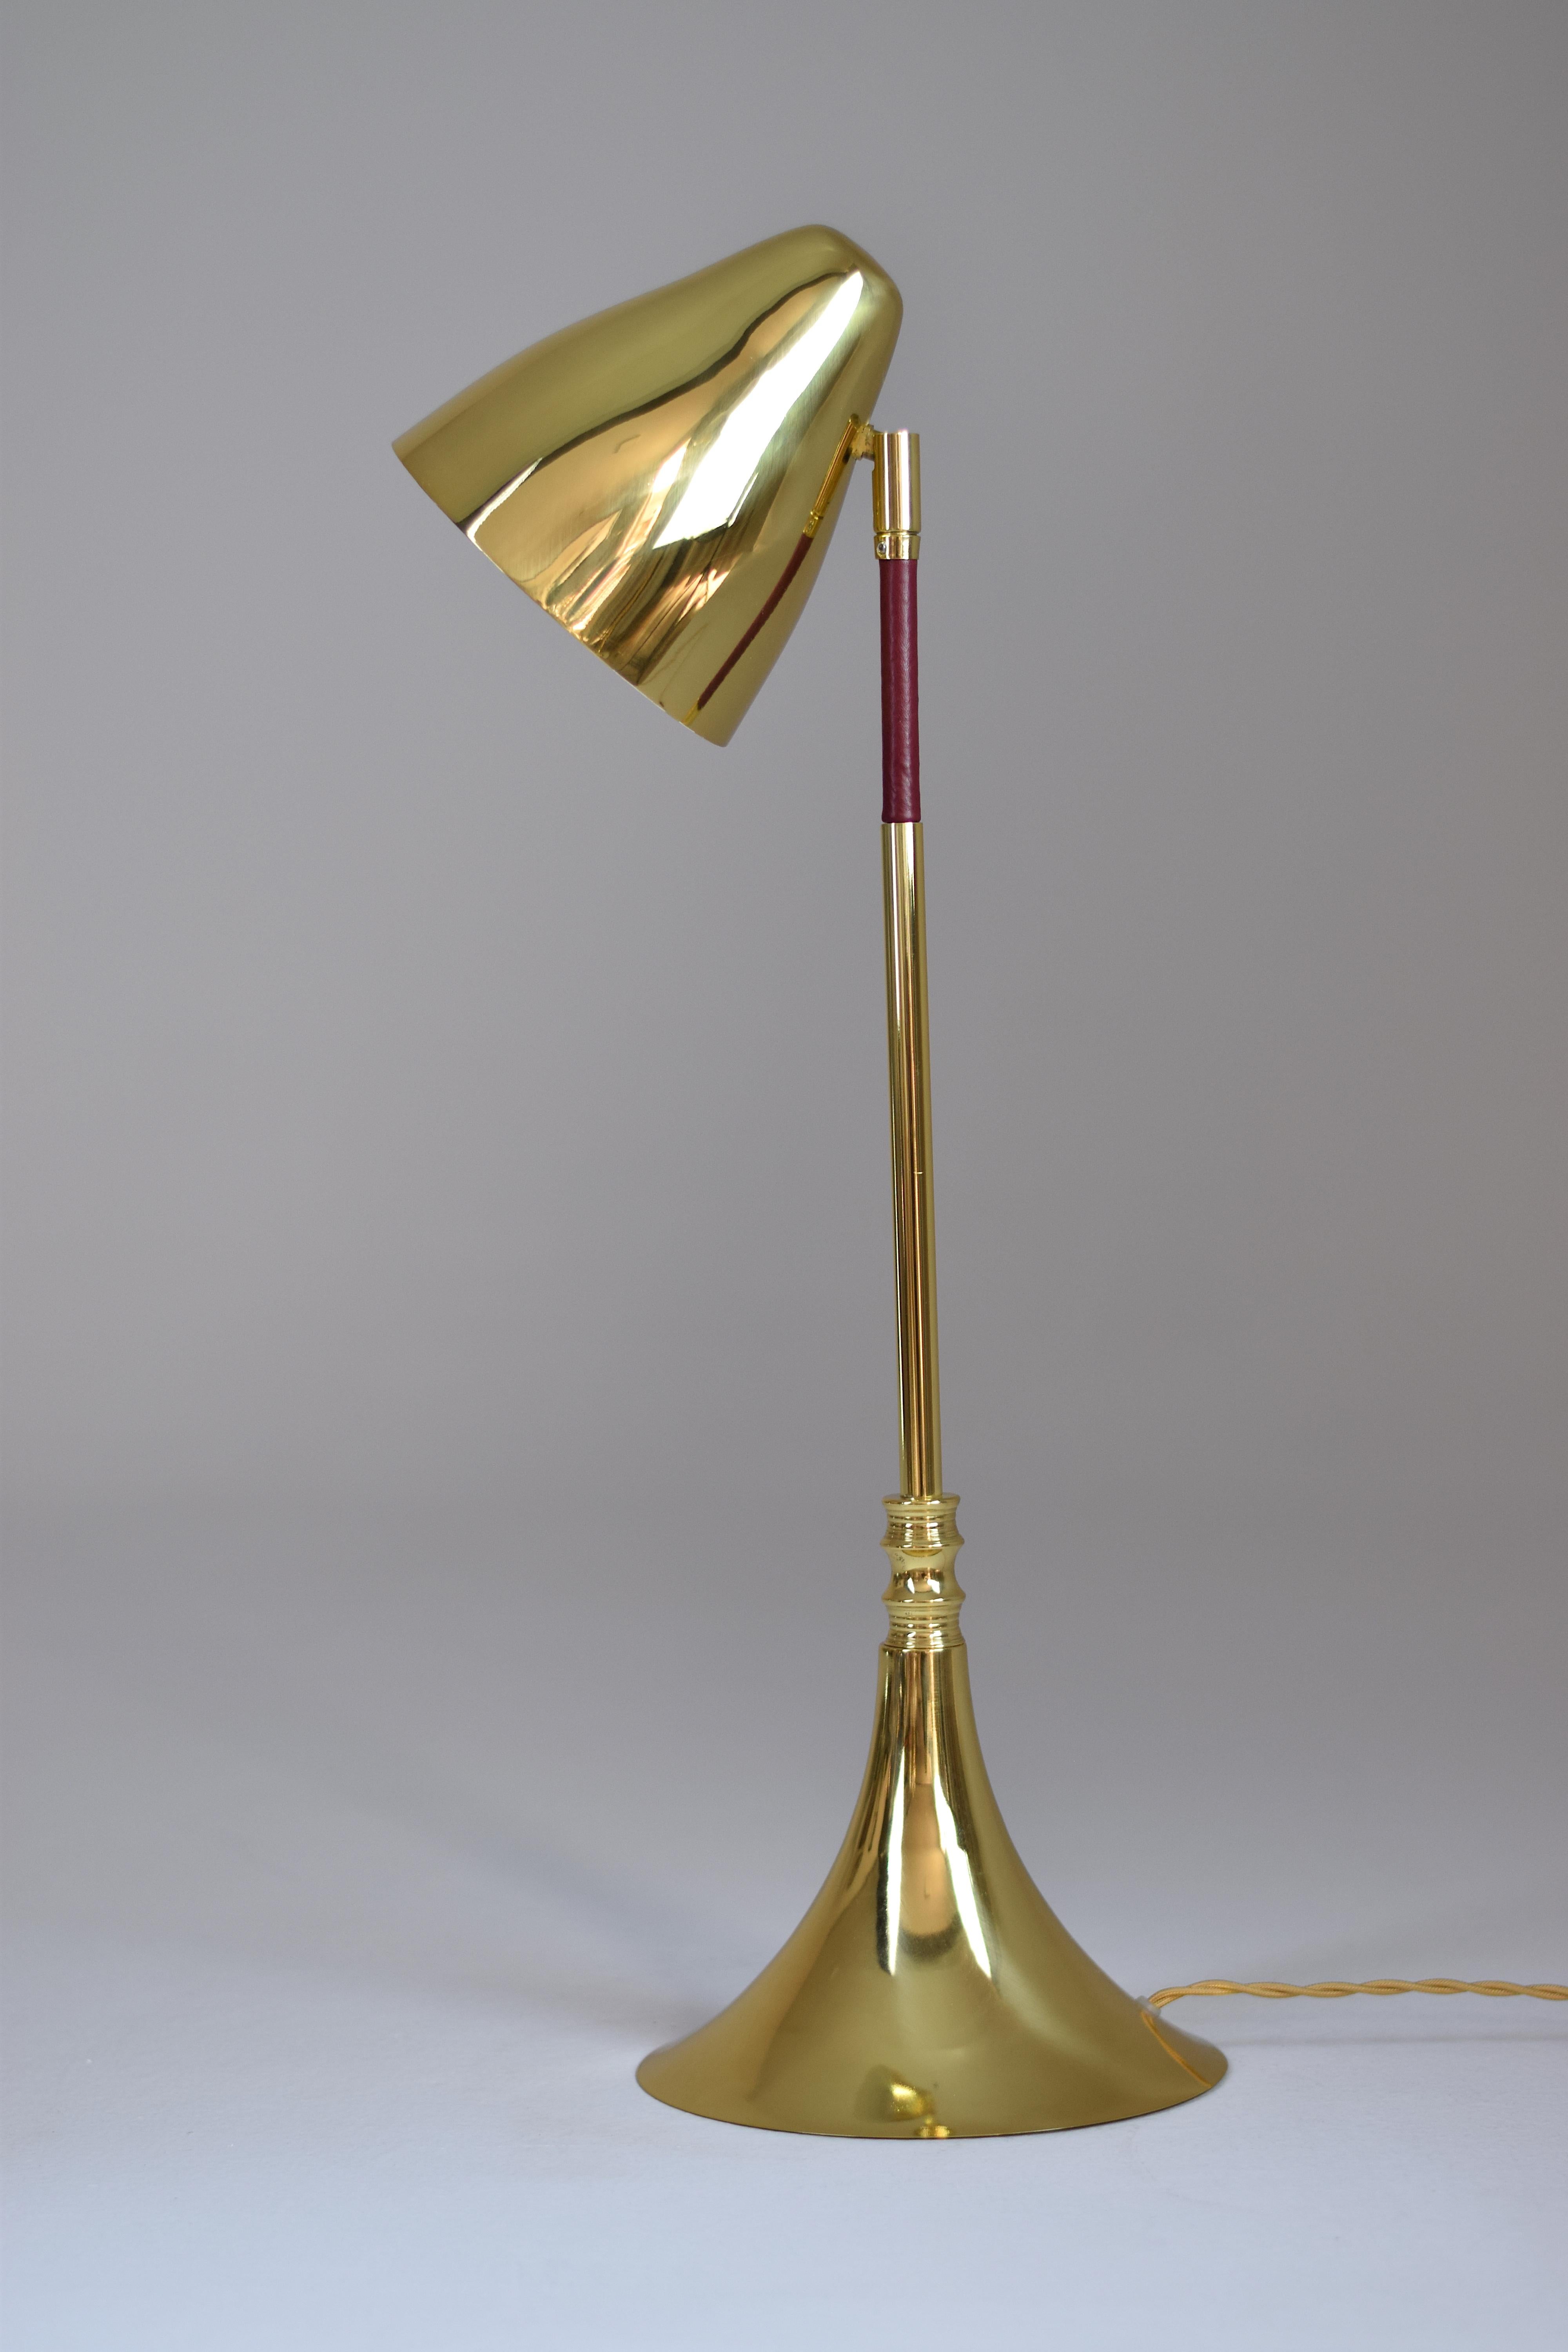 A table lamp designed in full solid brass with leather stitched detail at the top of the tubular stand. The conical shade-mounted with a moveable joint-di uses a warm light with a large focus.
1x60 W Max E14
230 V - LED Integrated 120 V - LED.

Flow